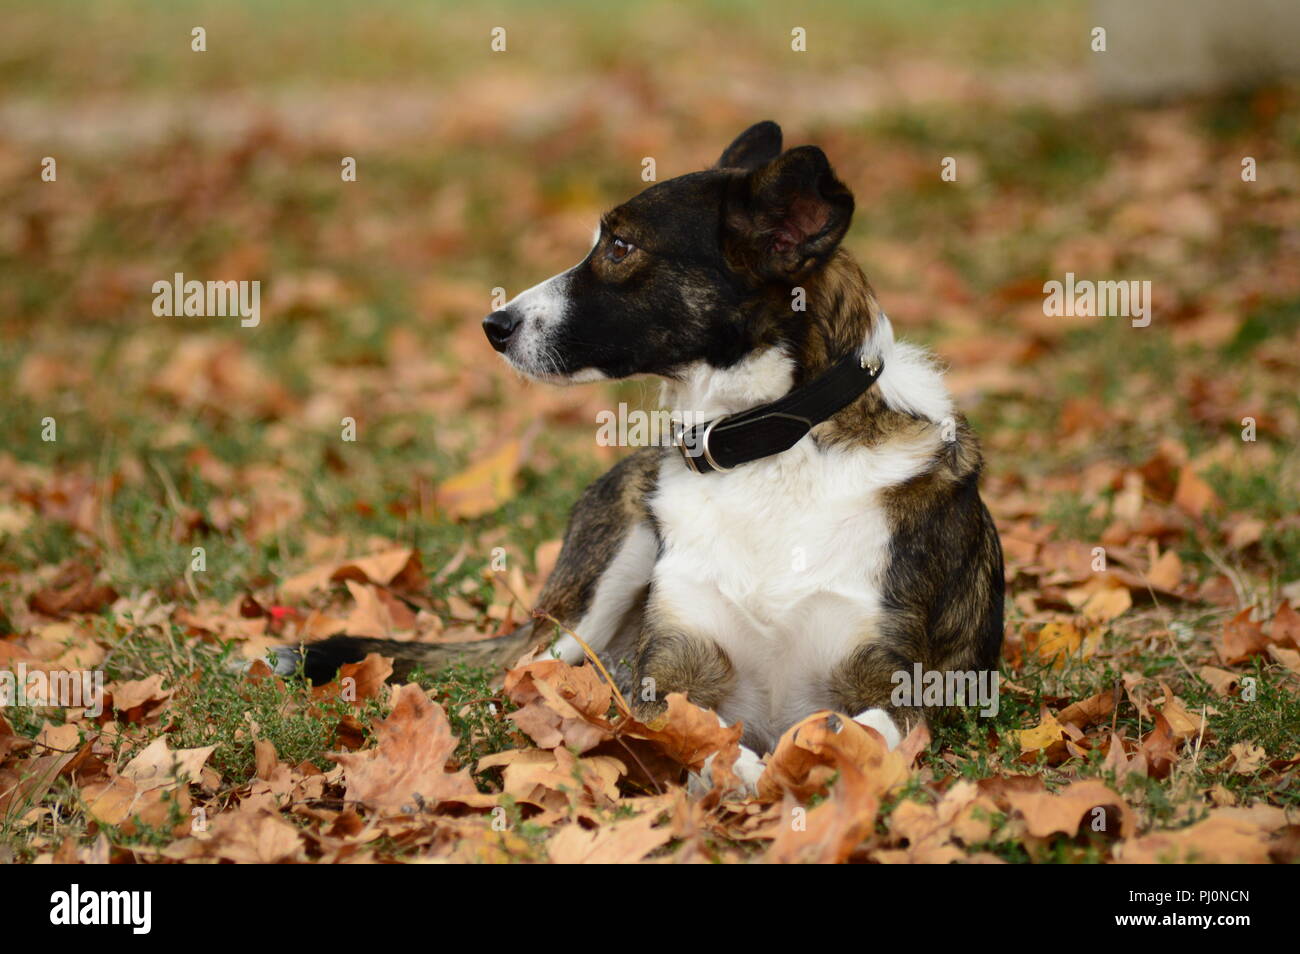 Dog in a park in autumn Stock Photo